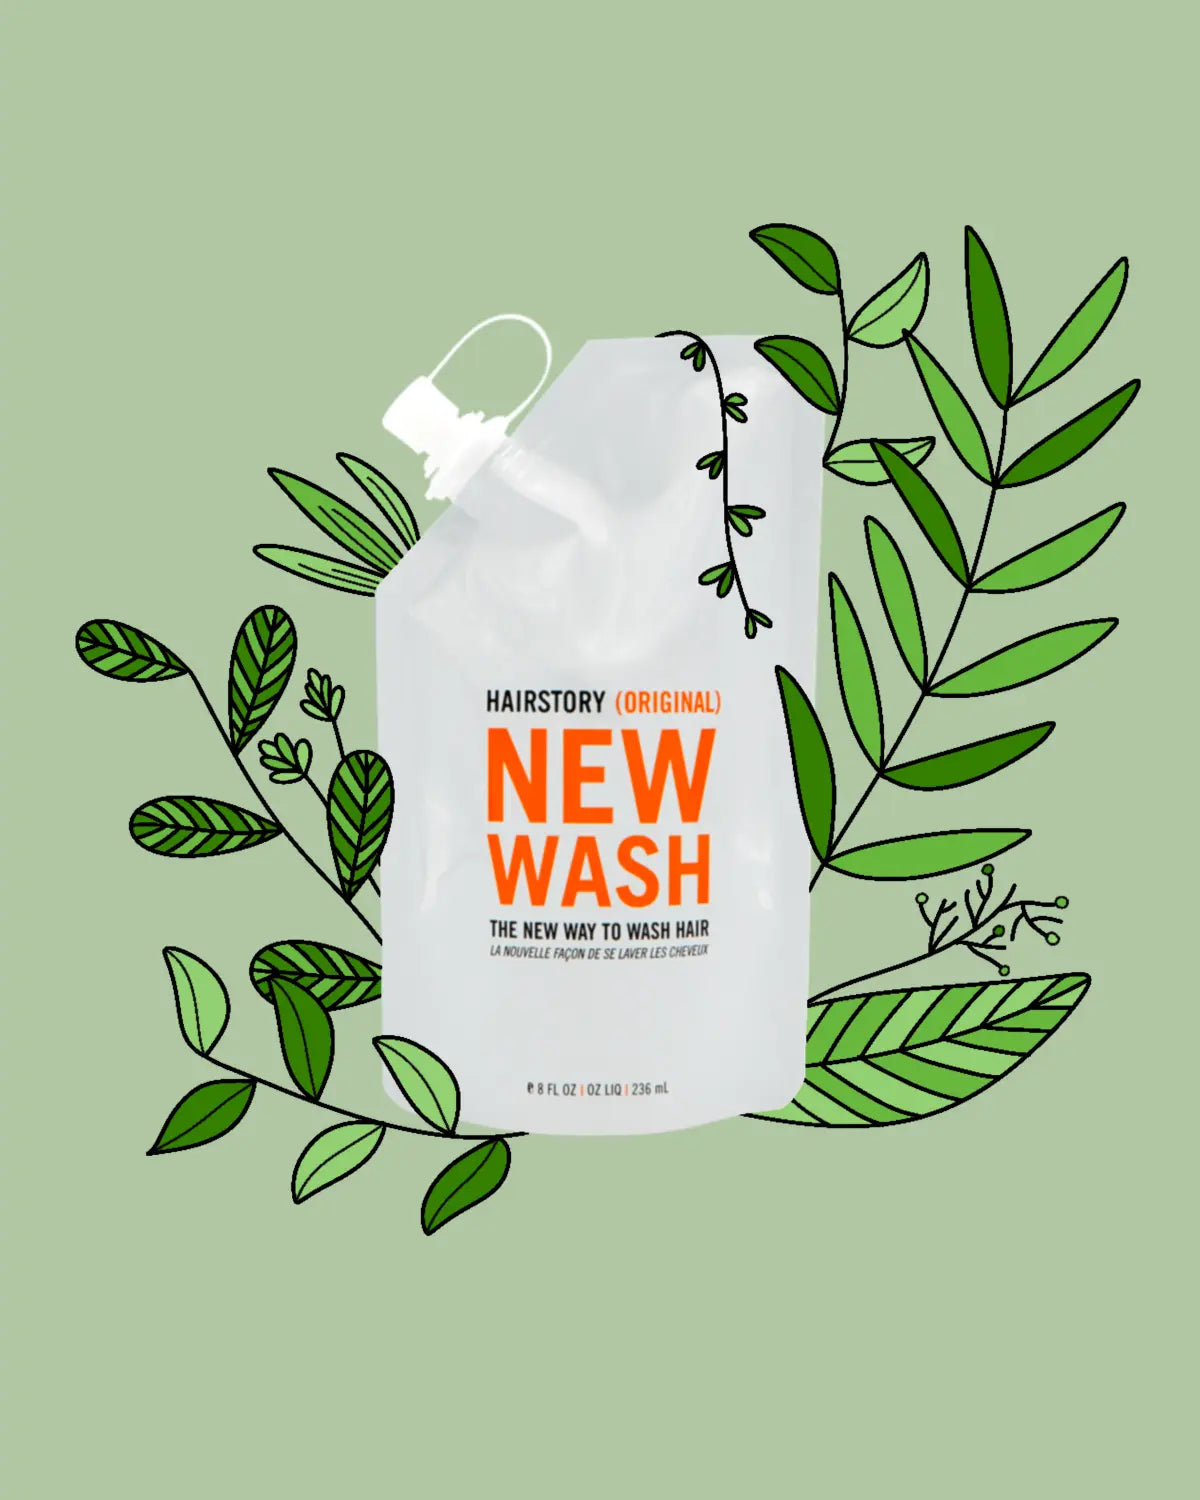 New wash product